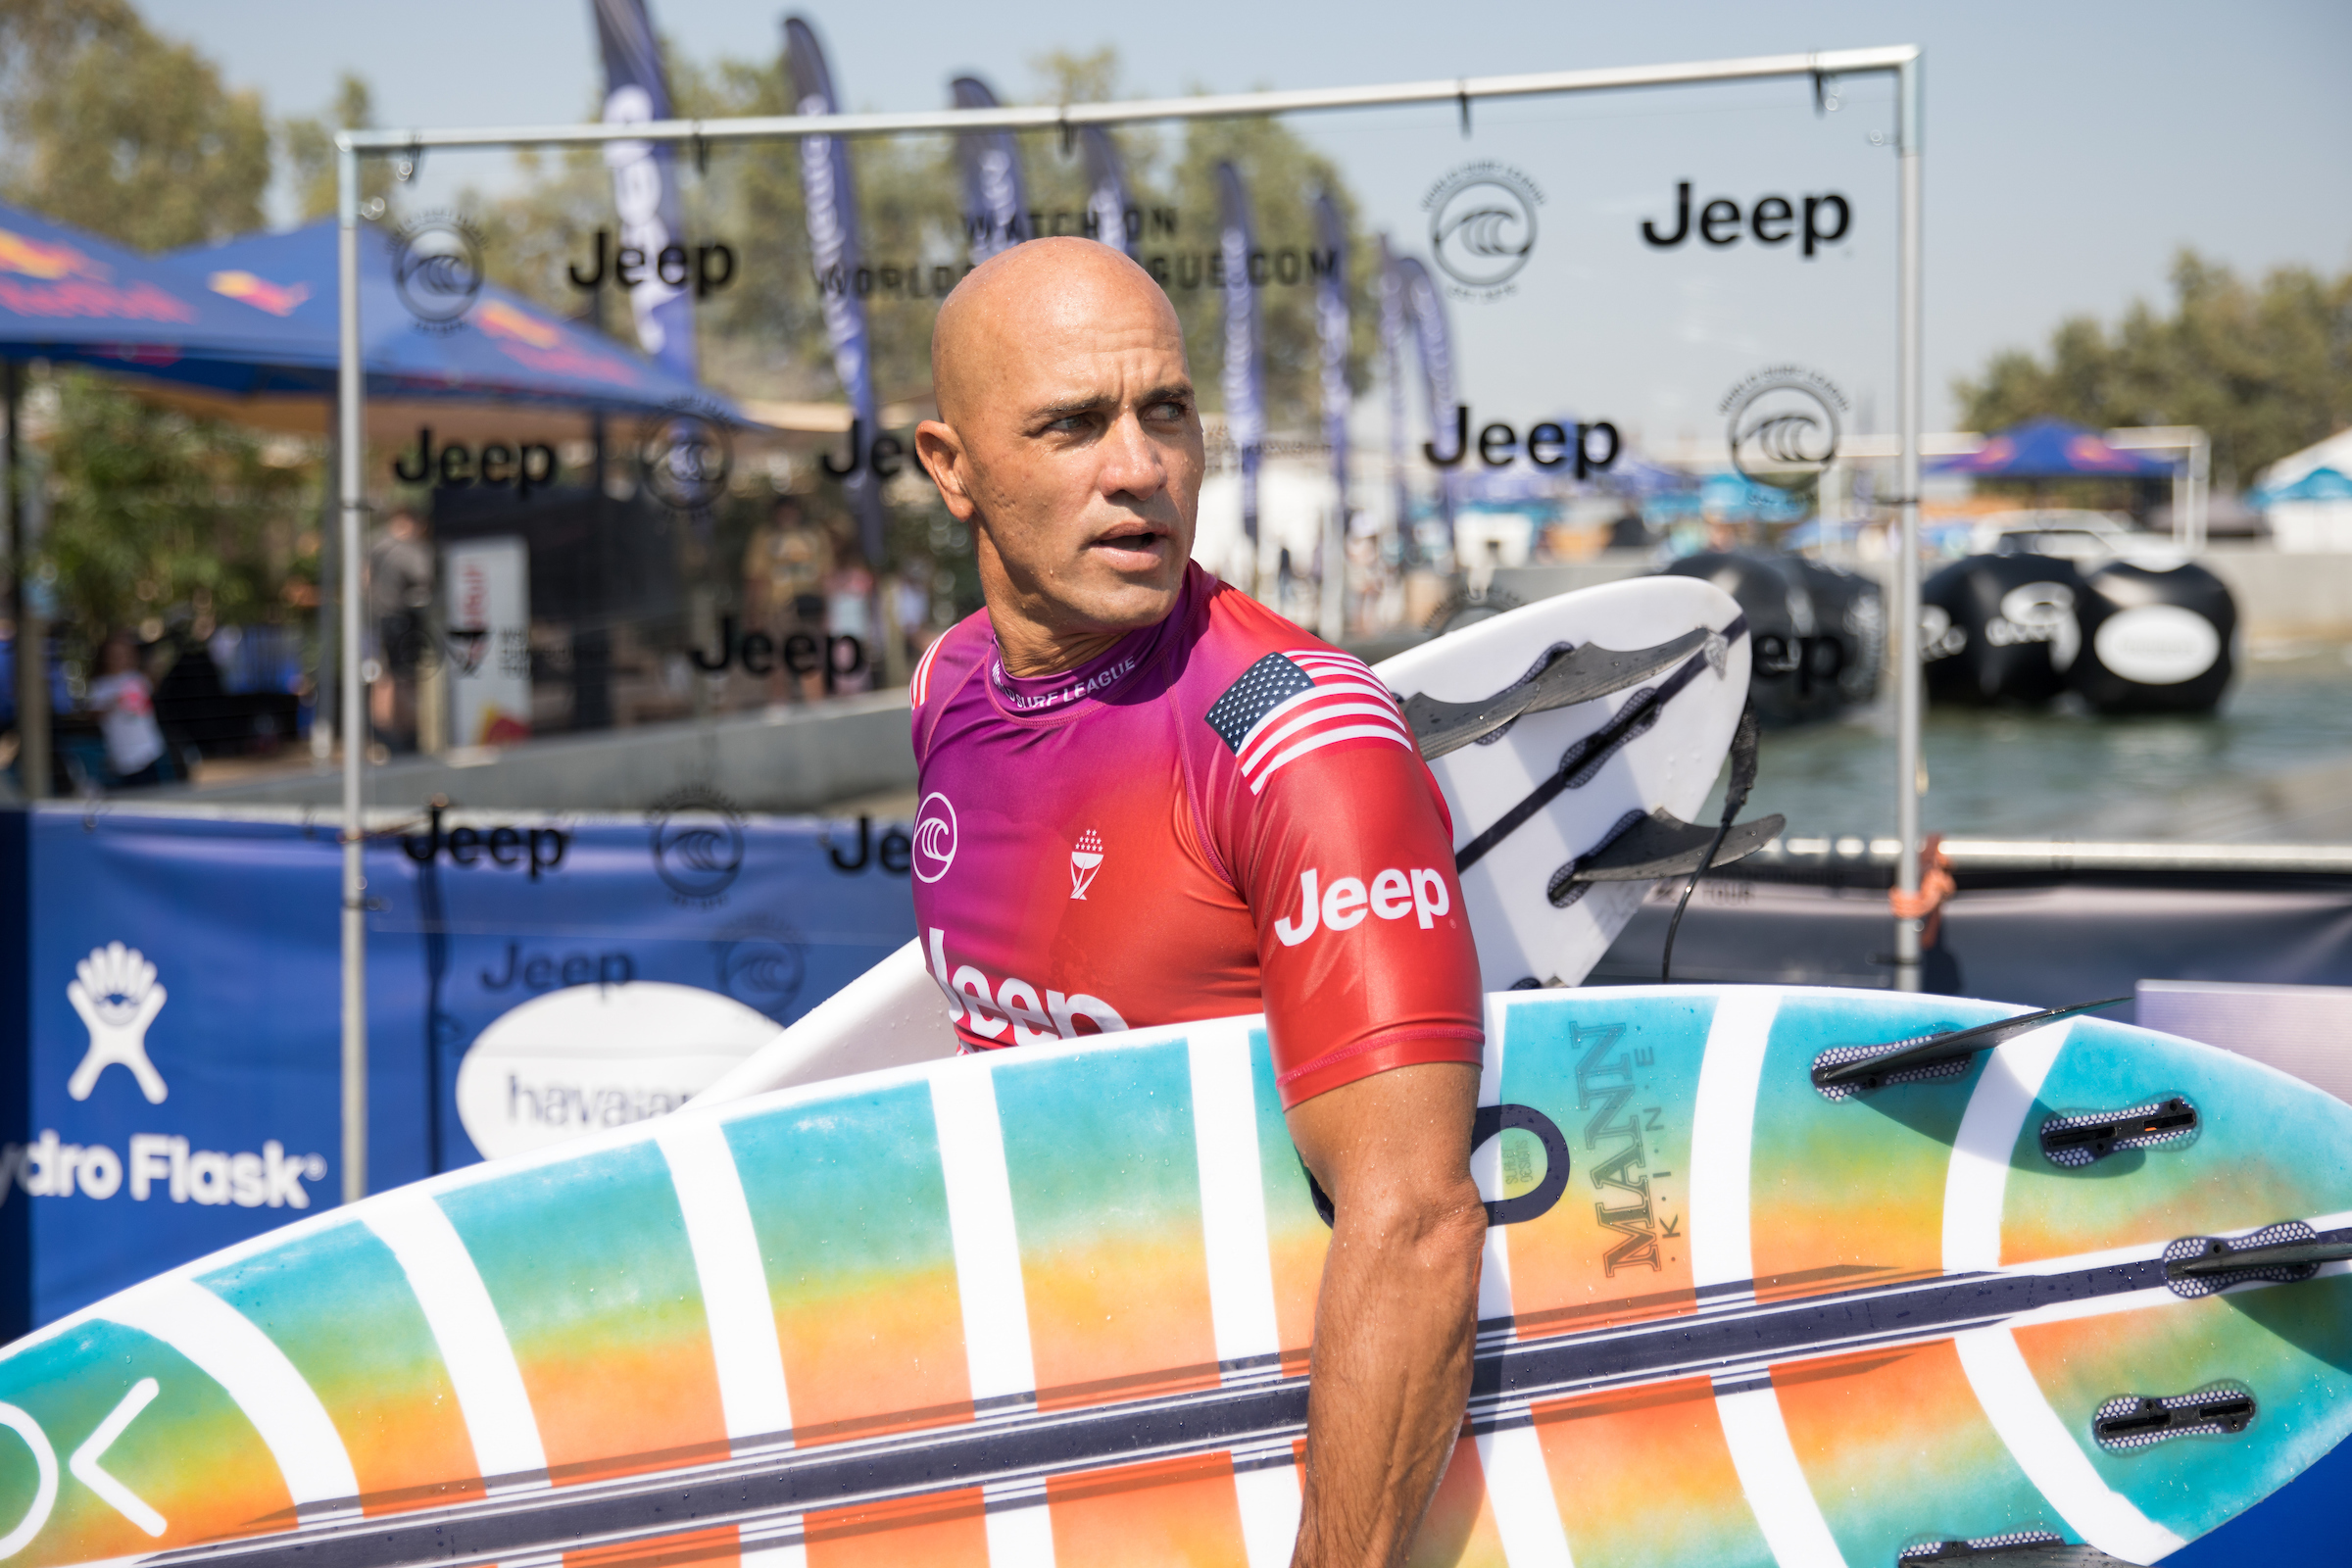 Kelly Slater reckons there are more surfers in the world than golfers